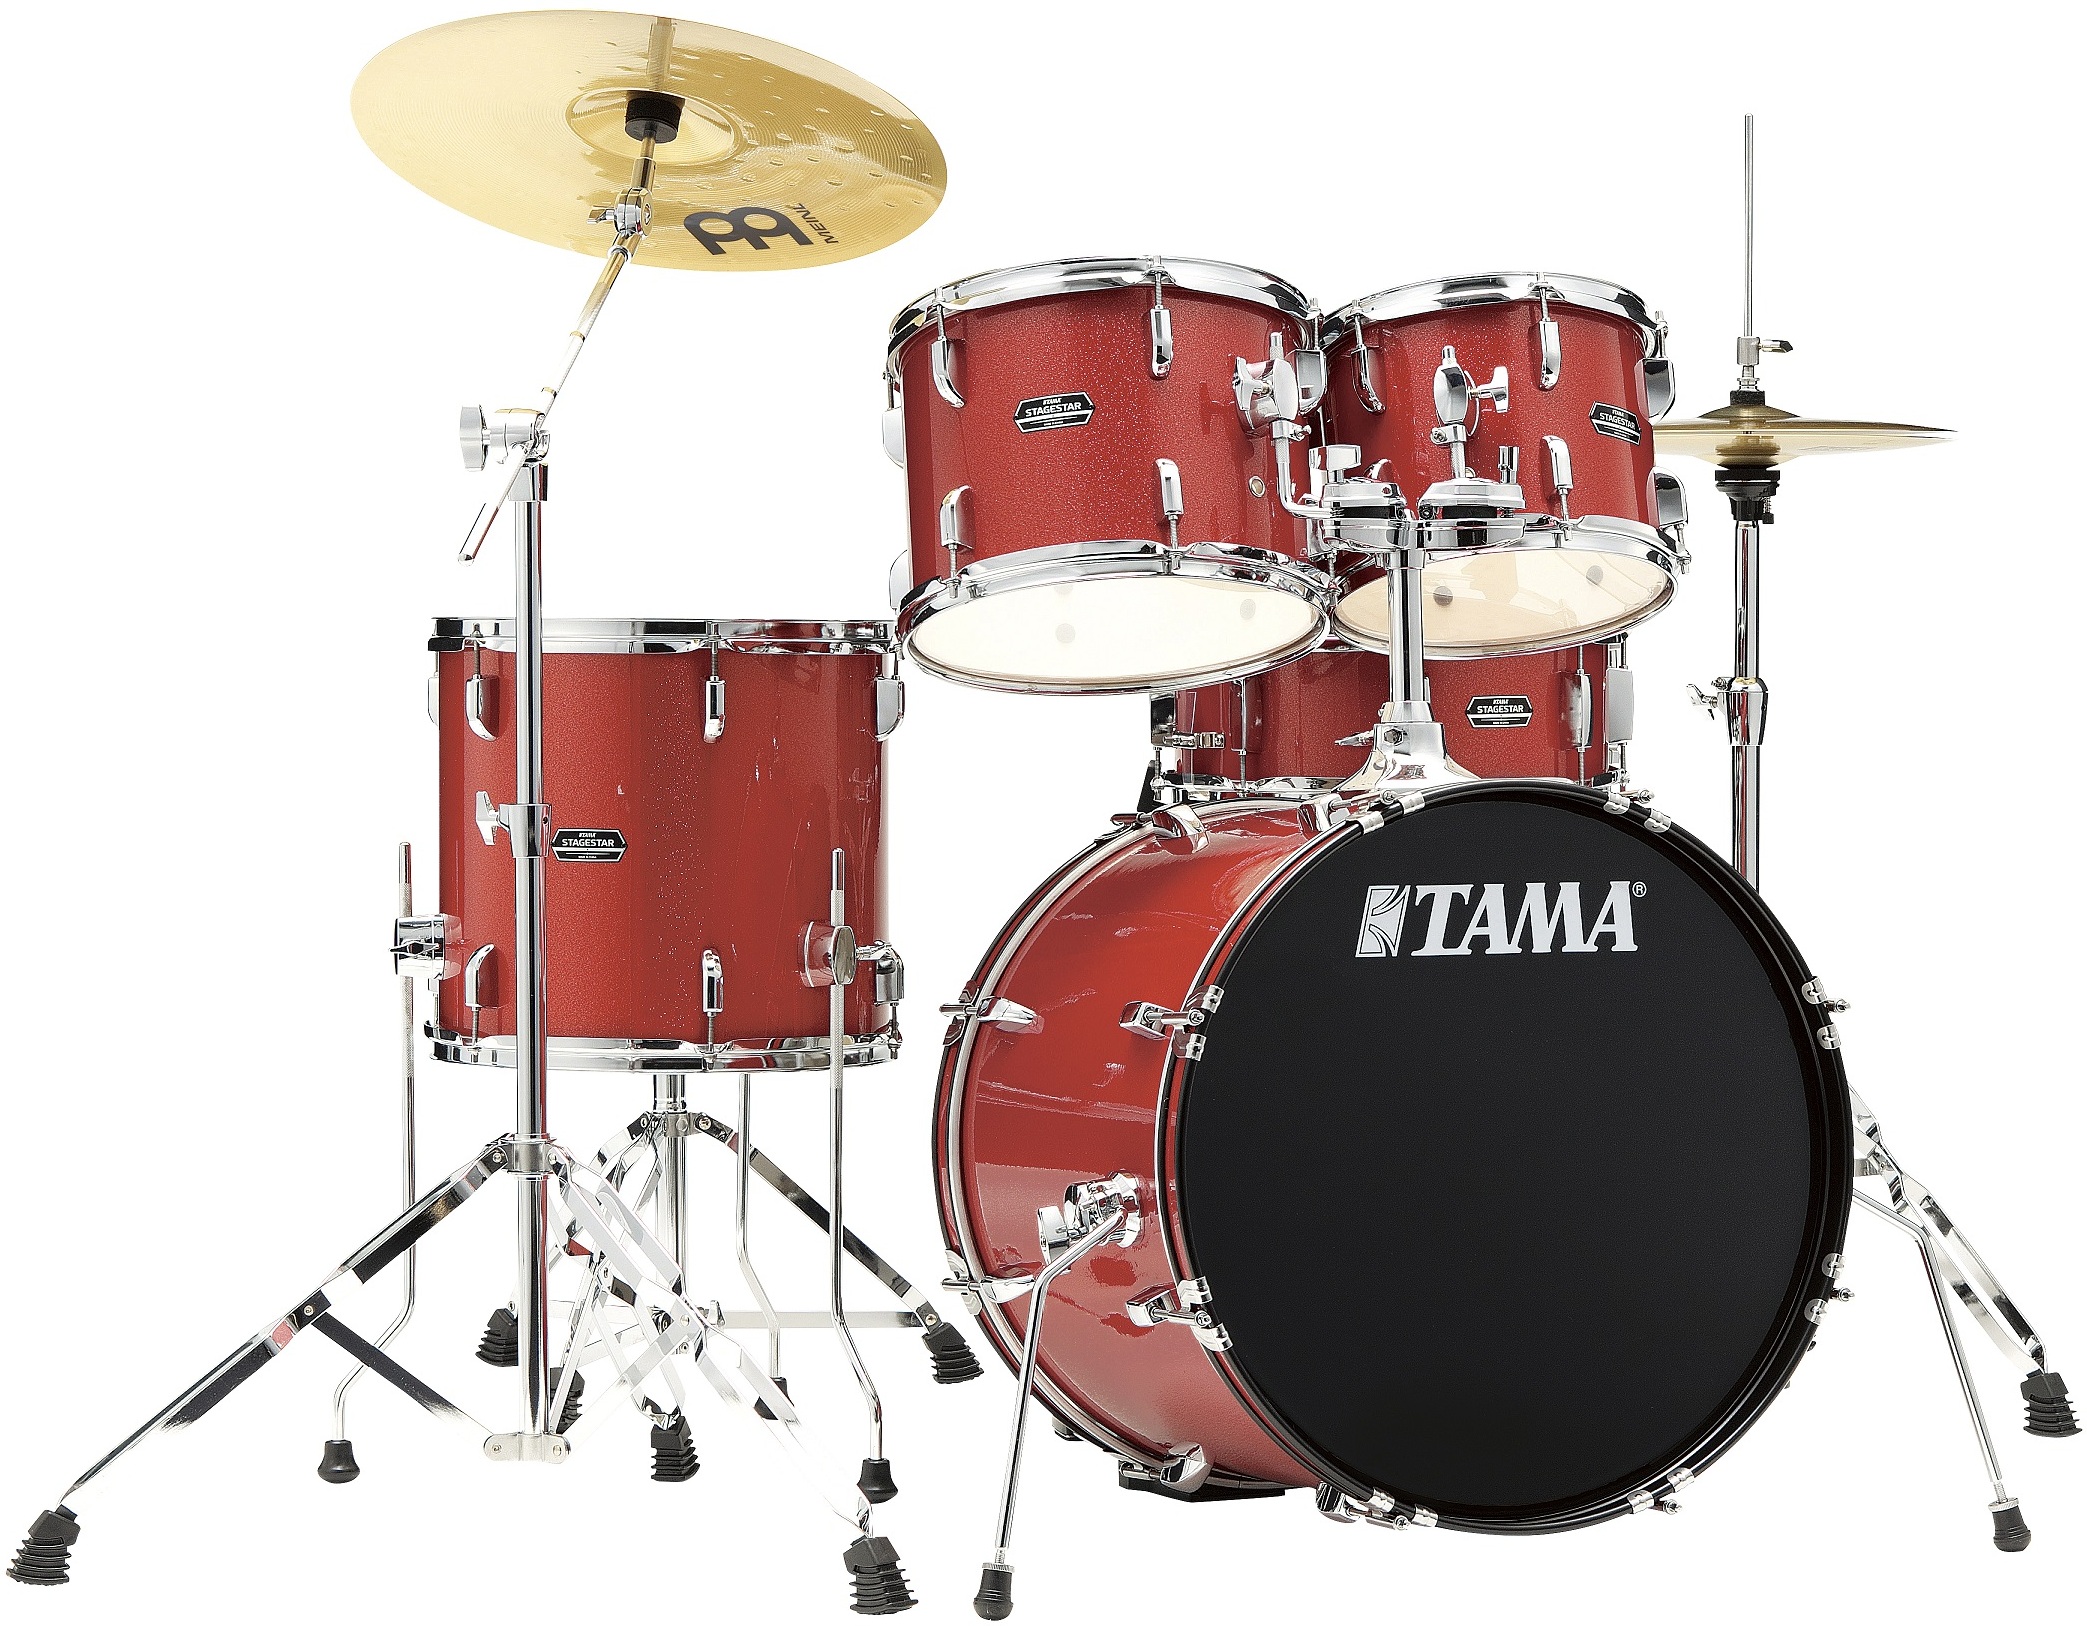 Tama Stagestar St50h5 20 Poplar Kit - Candy Red Sparkle - Stage drumstel - Main picture